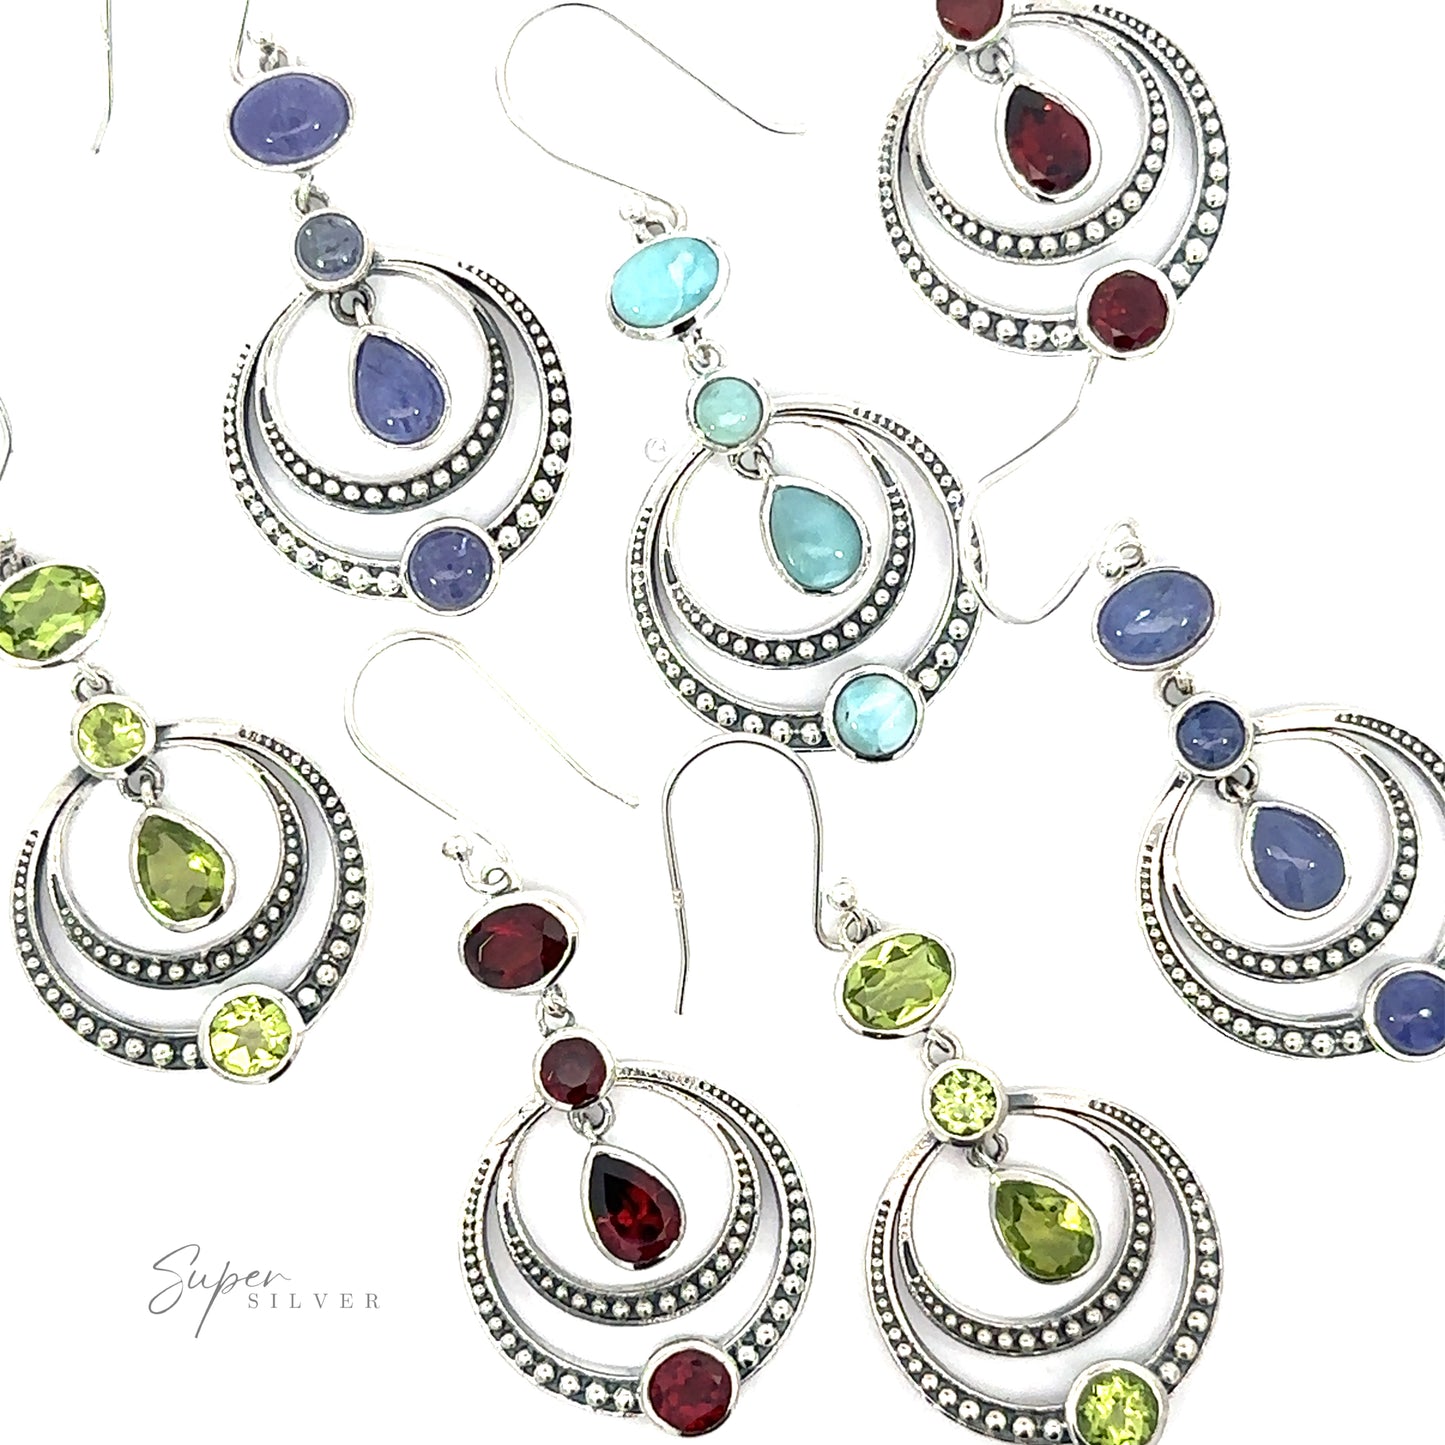 A collection of Overlapping Circle Earrings with Vibrant Gemstones, each adorned with different colored stones including purple, blue, red, and green, arranged on a white background.